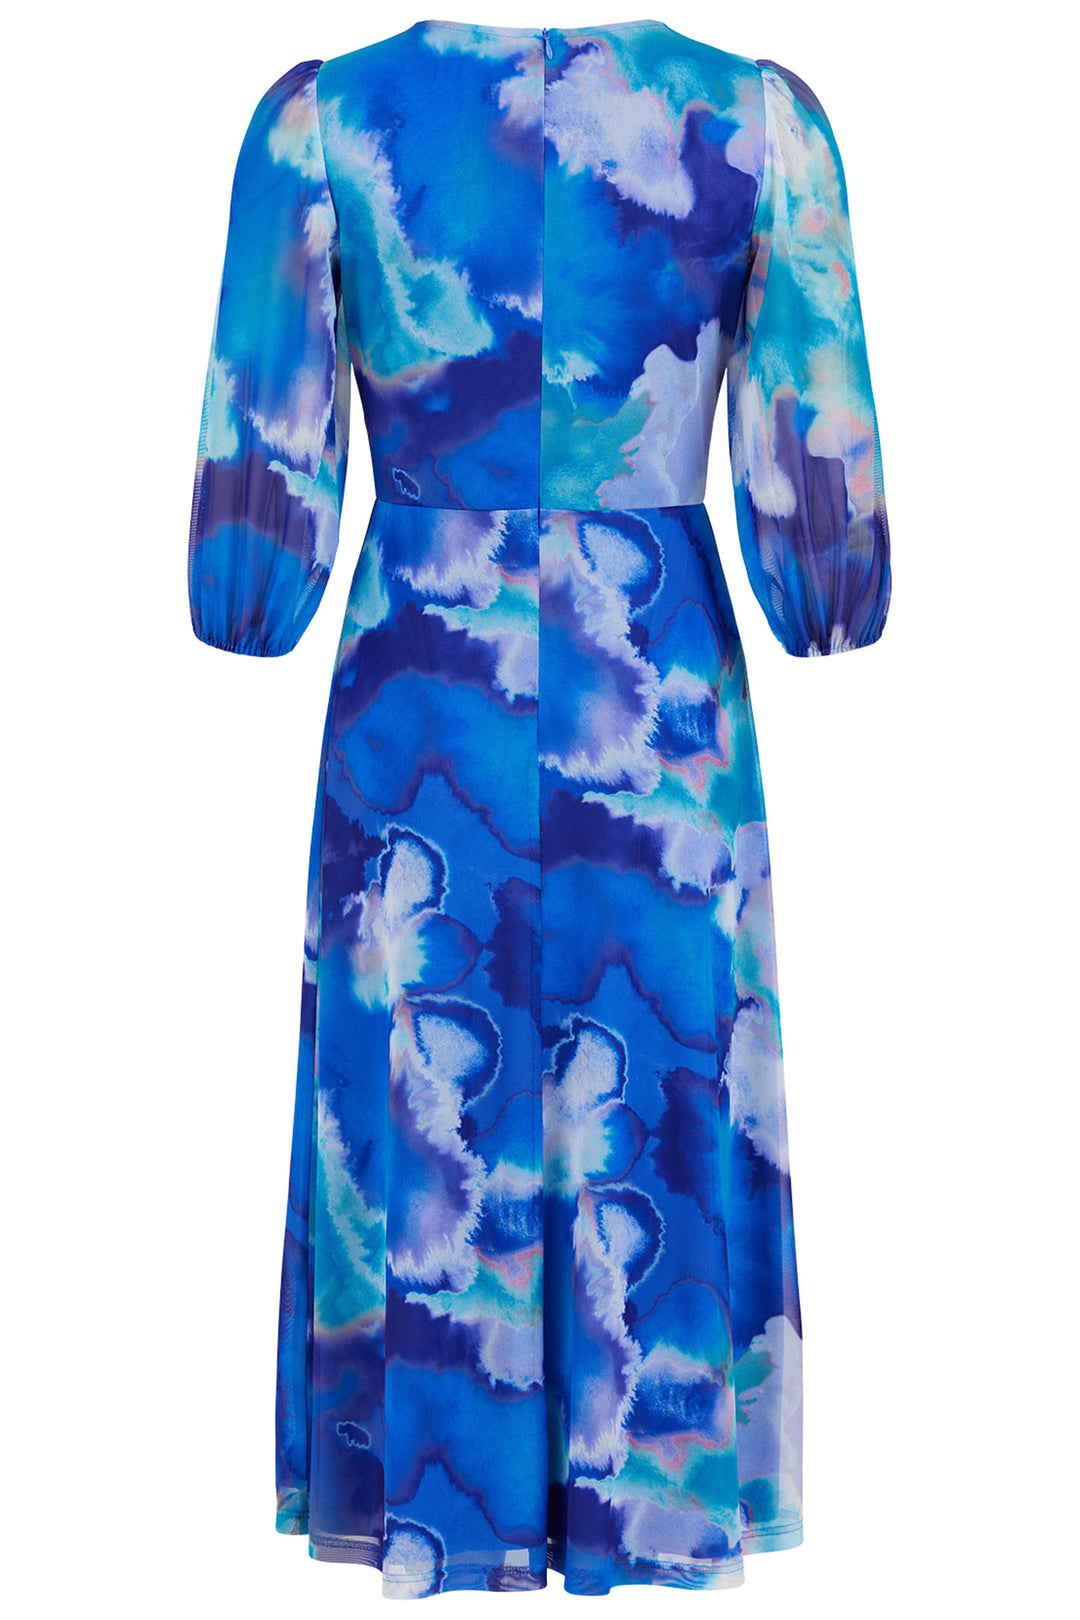 Tia London 78809 65 Blue Abstract Print Crossover Dress - Experience Boutique